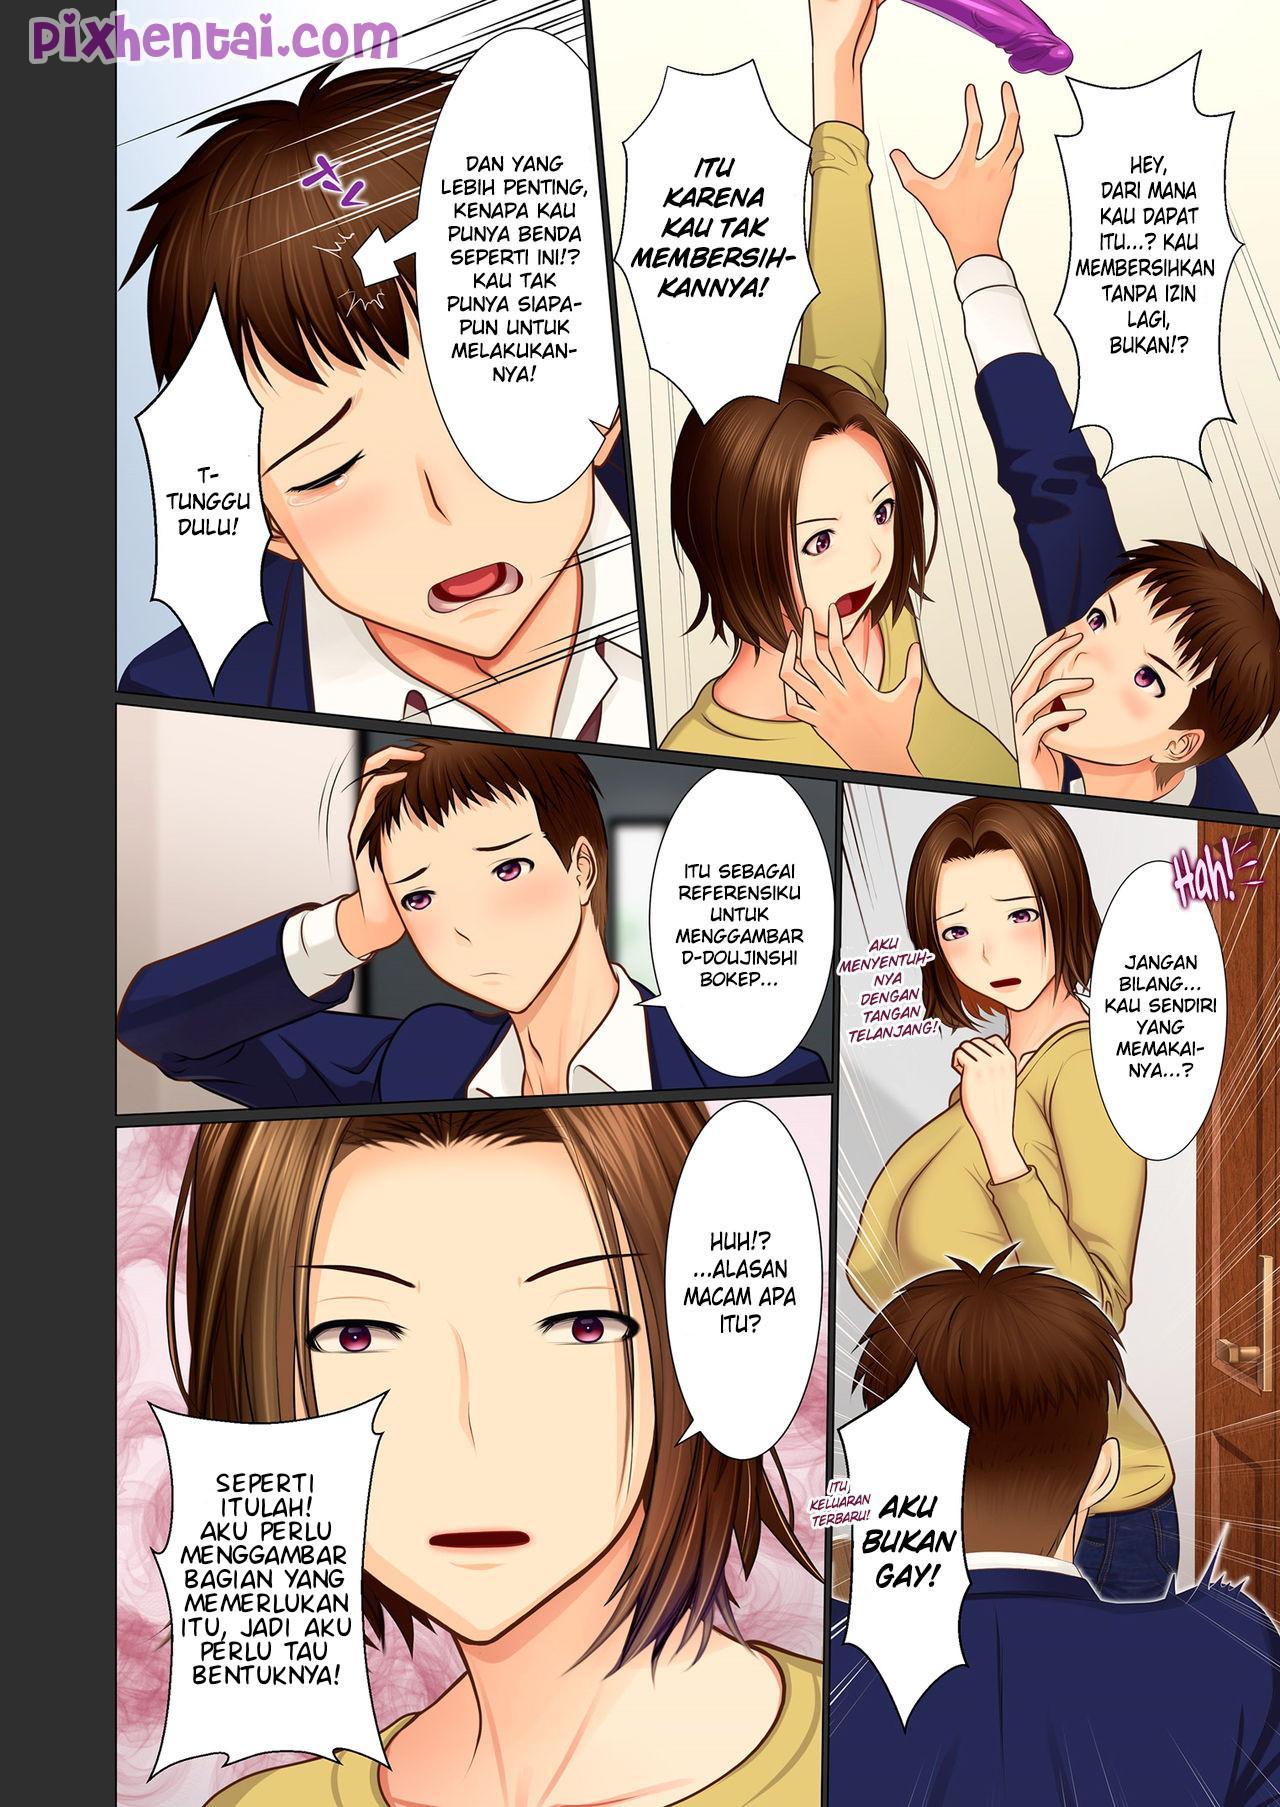 Komik Hentai Mother and Son Connected By An Immoral Rod Of Lust Manga XXX Porn Doujin Sex Bokep 06